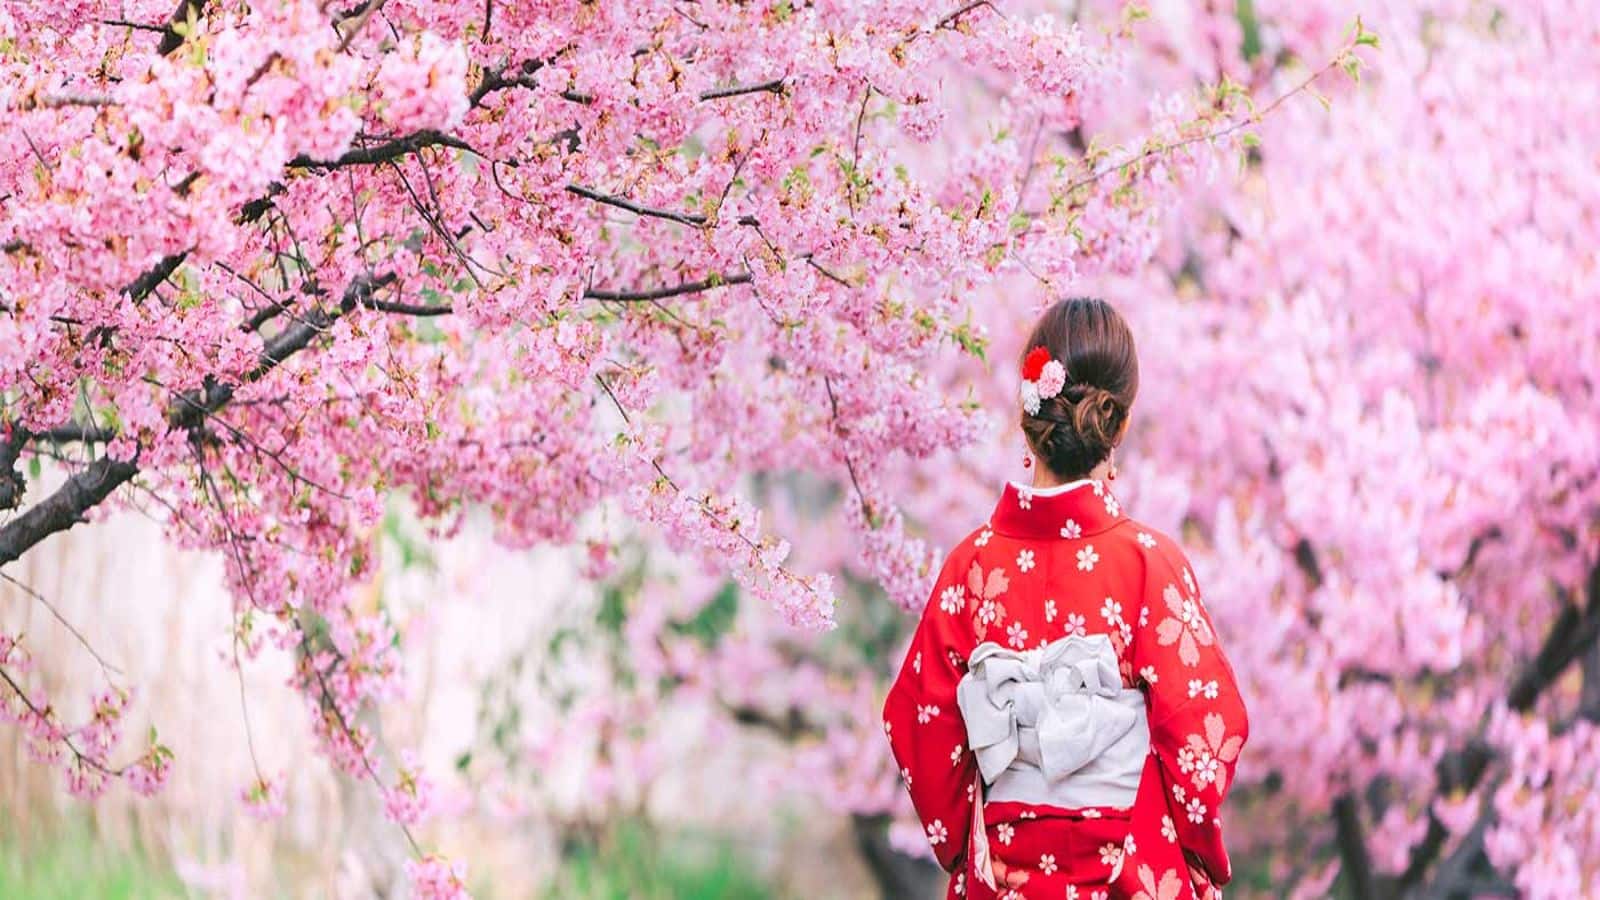 Witness Kyoto's cherry blossoms with this travel guide